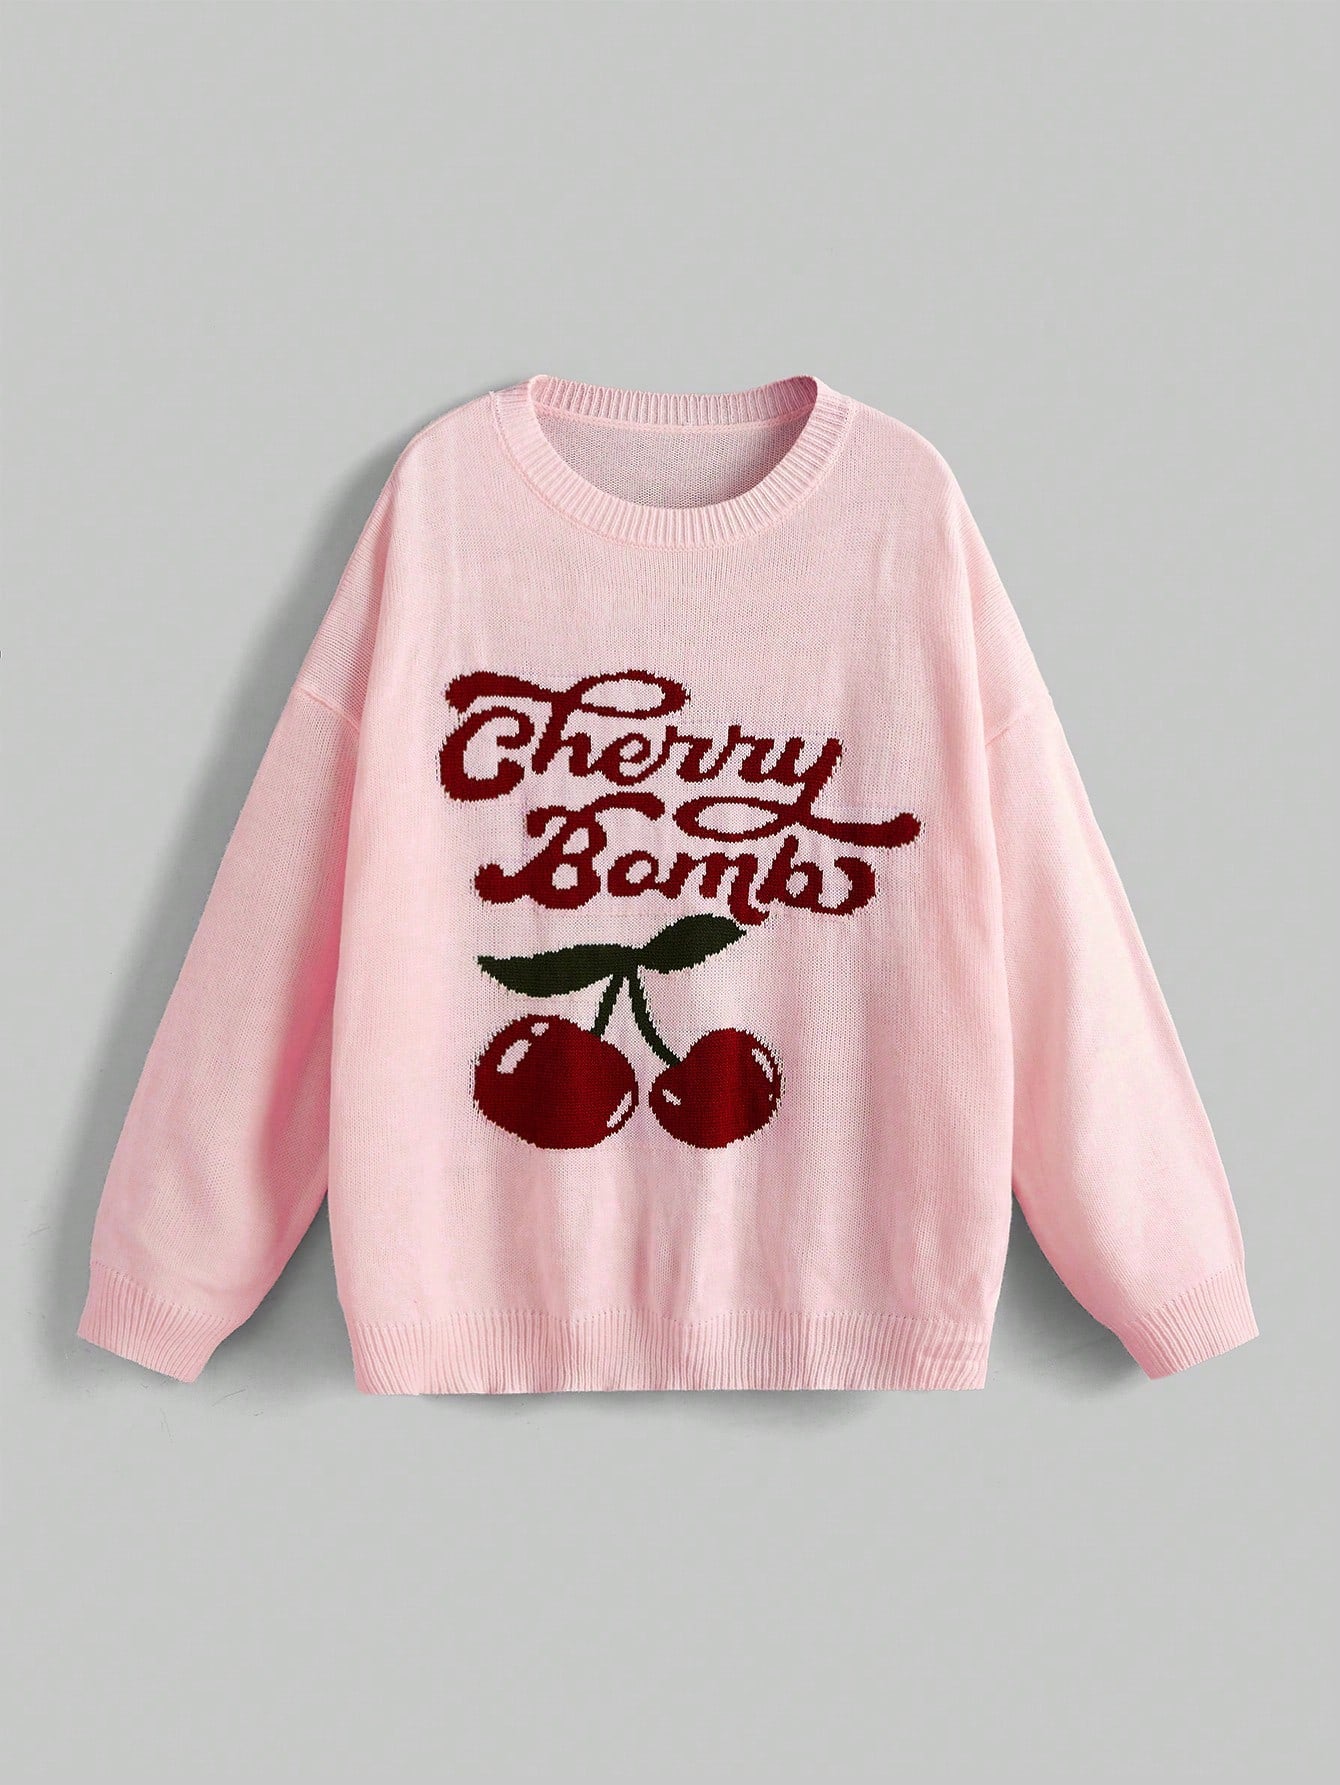 Plus Size Women's Letter & Cherry Pattern Sweater Pullover